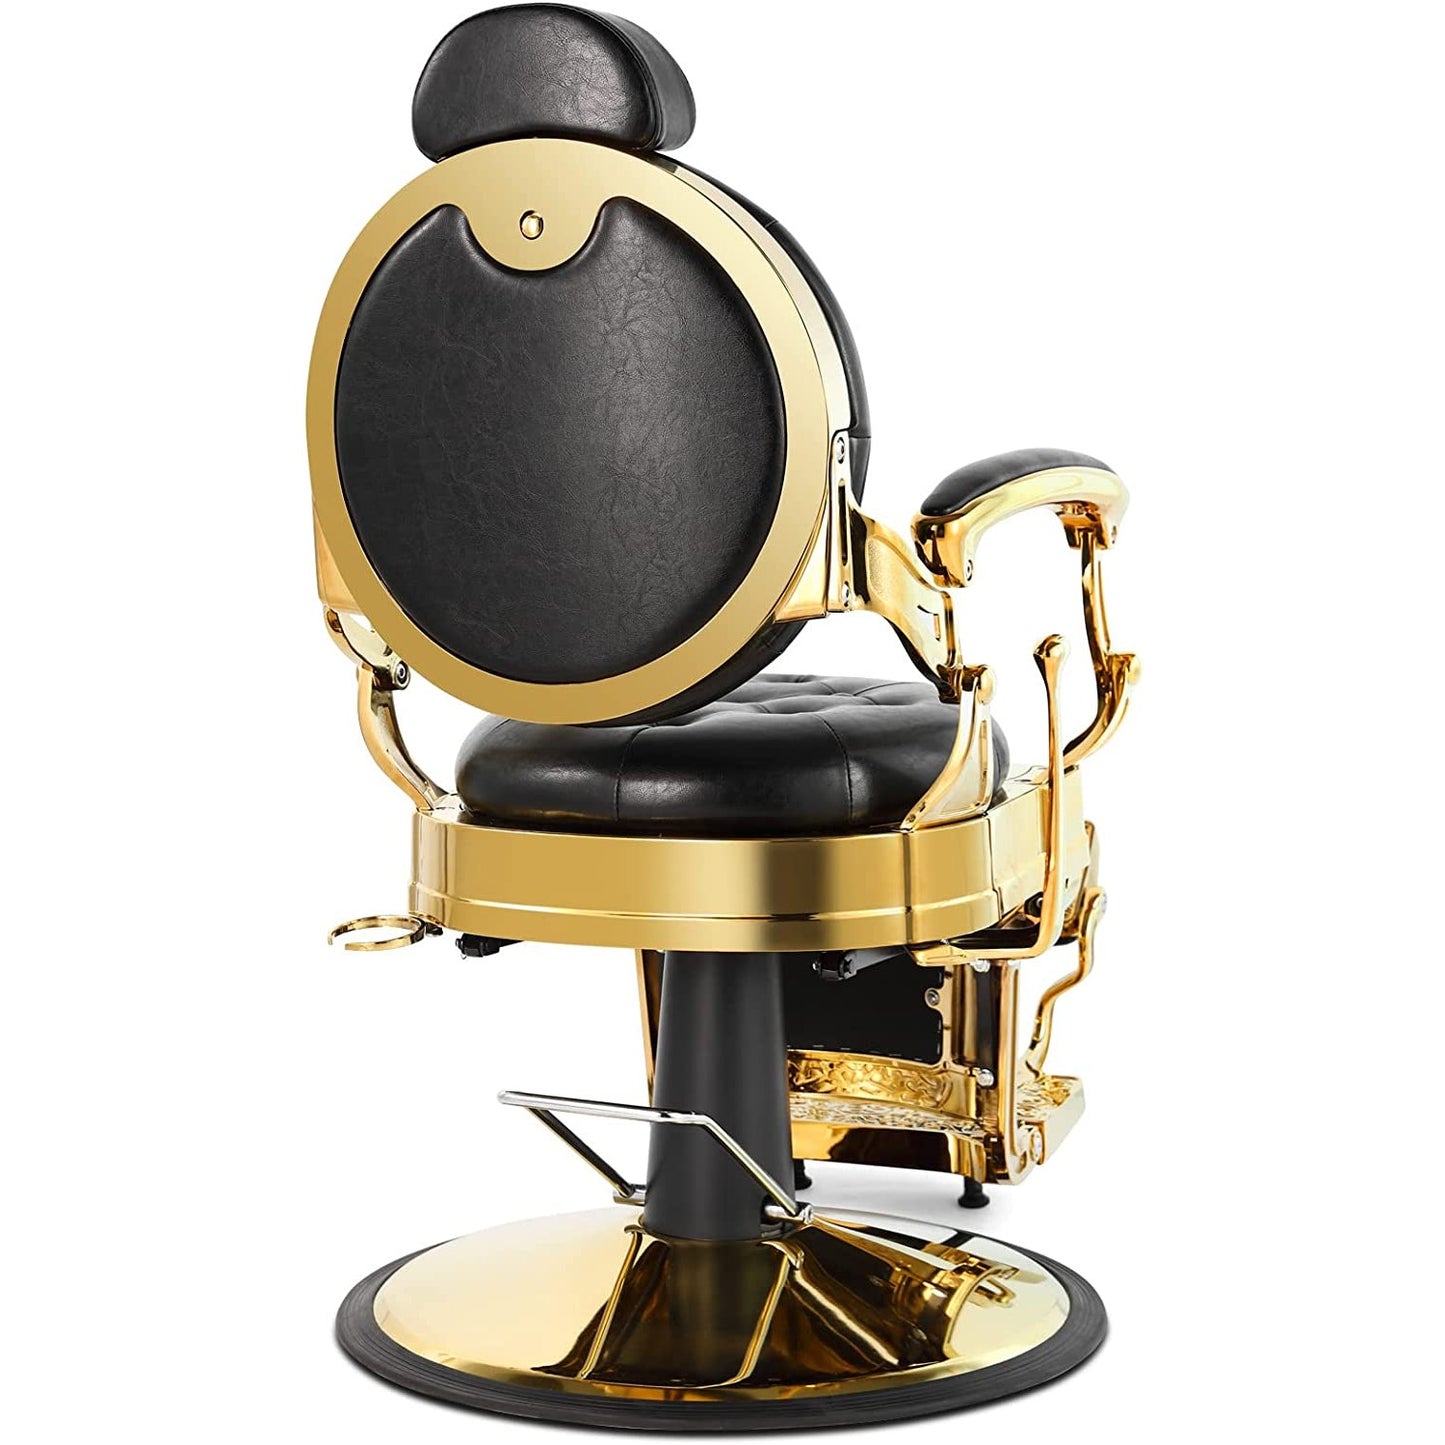 A back view for a retro style hydraulic barbers chair. The chair also features gold chrome with black button tufted cushioning.